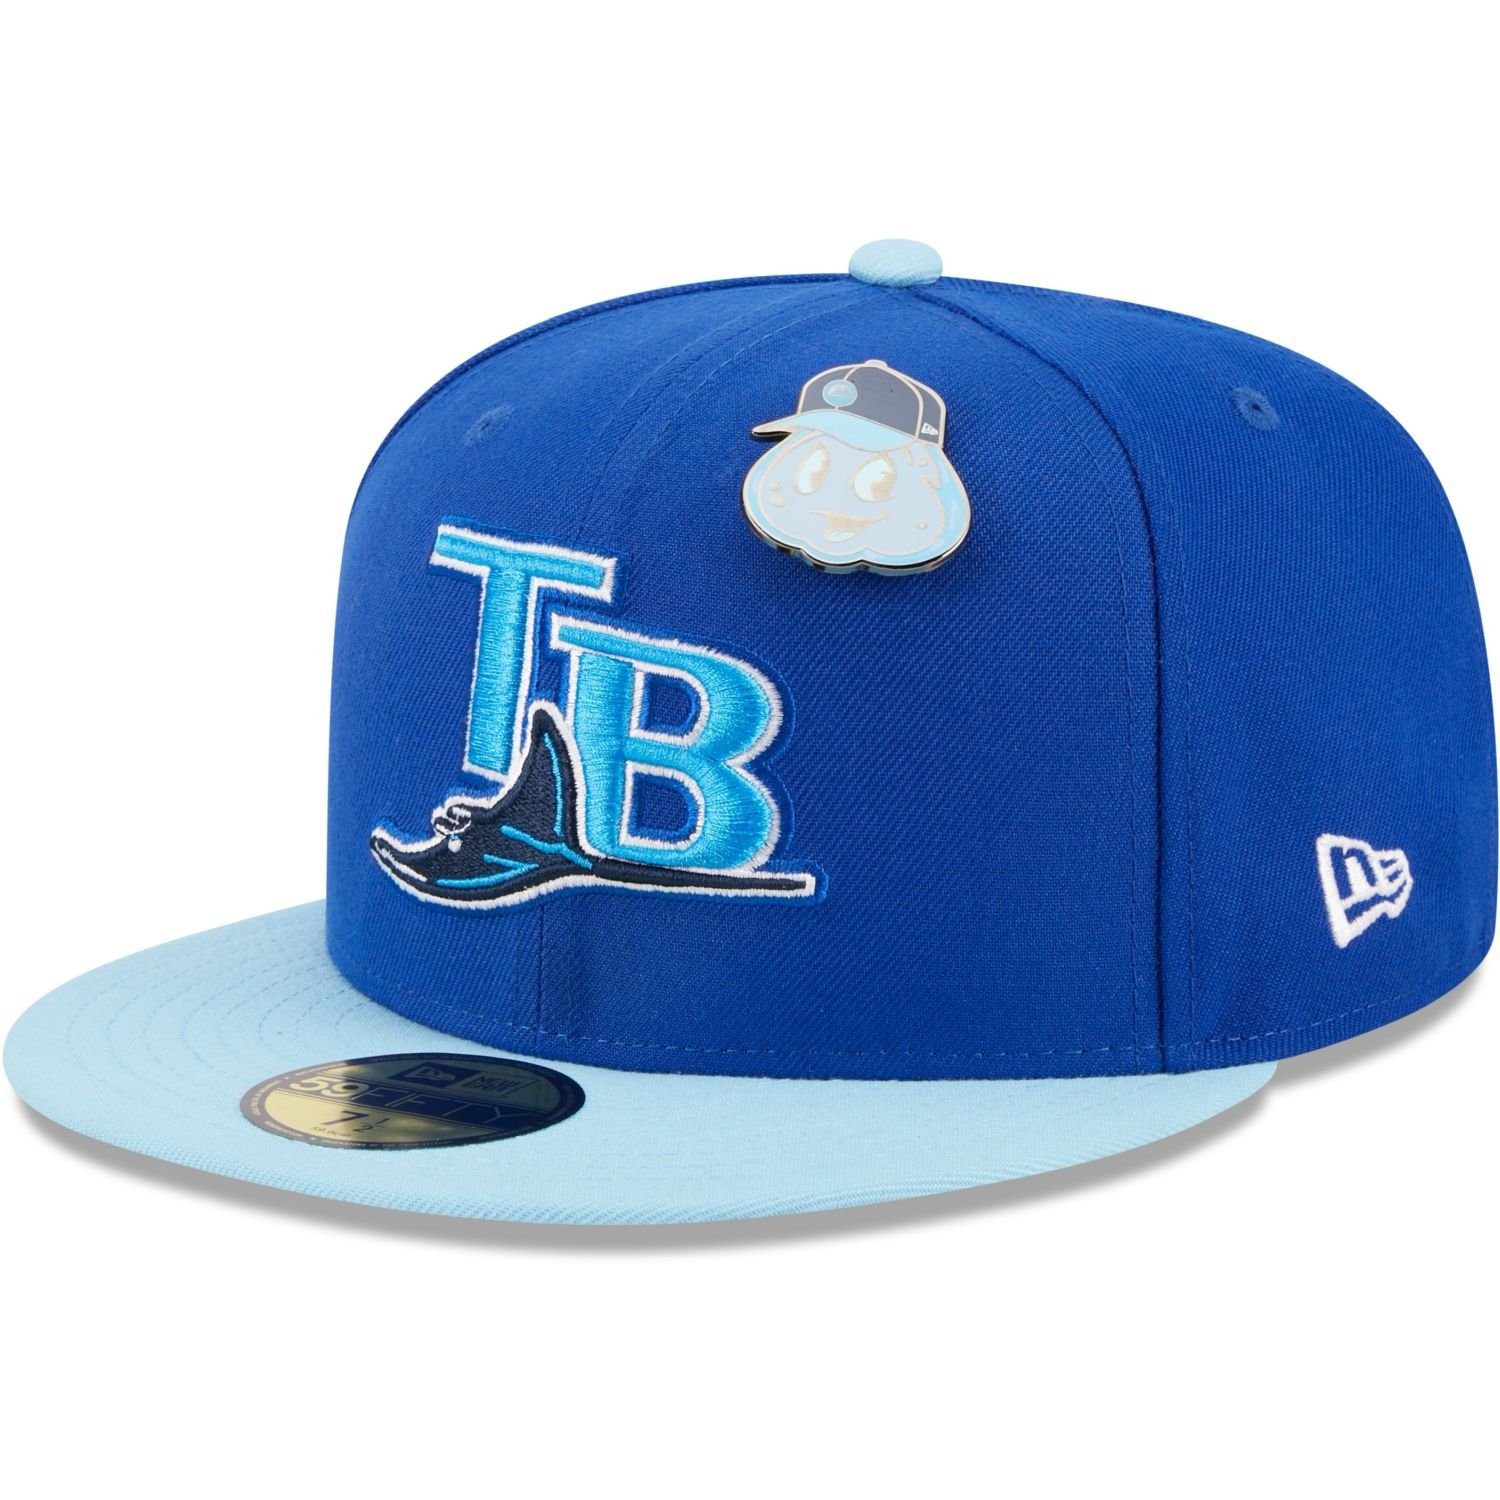 New Era Fitted Cap 59Fifty ELEMENTS PIN Tampa Bay Rays